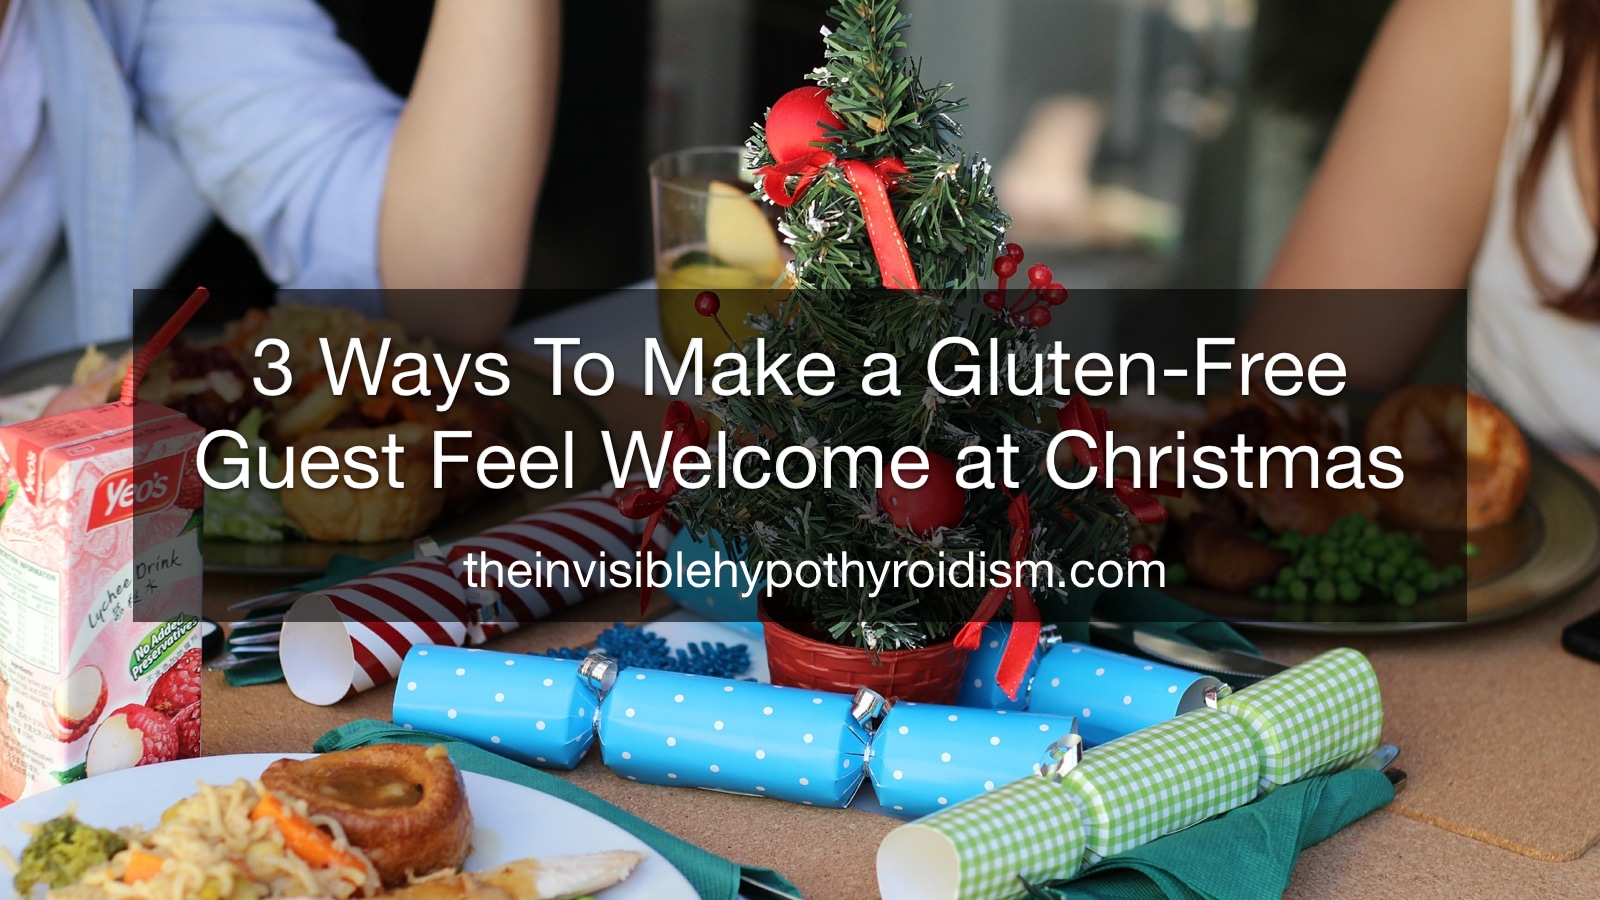 3 Ways To Make a Gluten-Free Guest Feel Welcome at Christmas